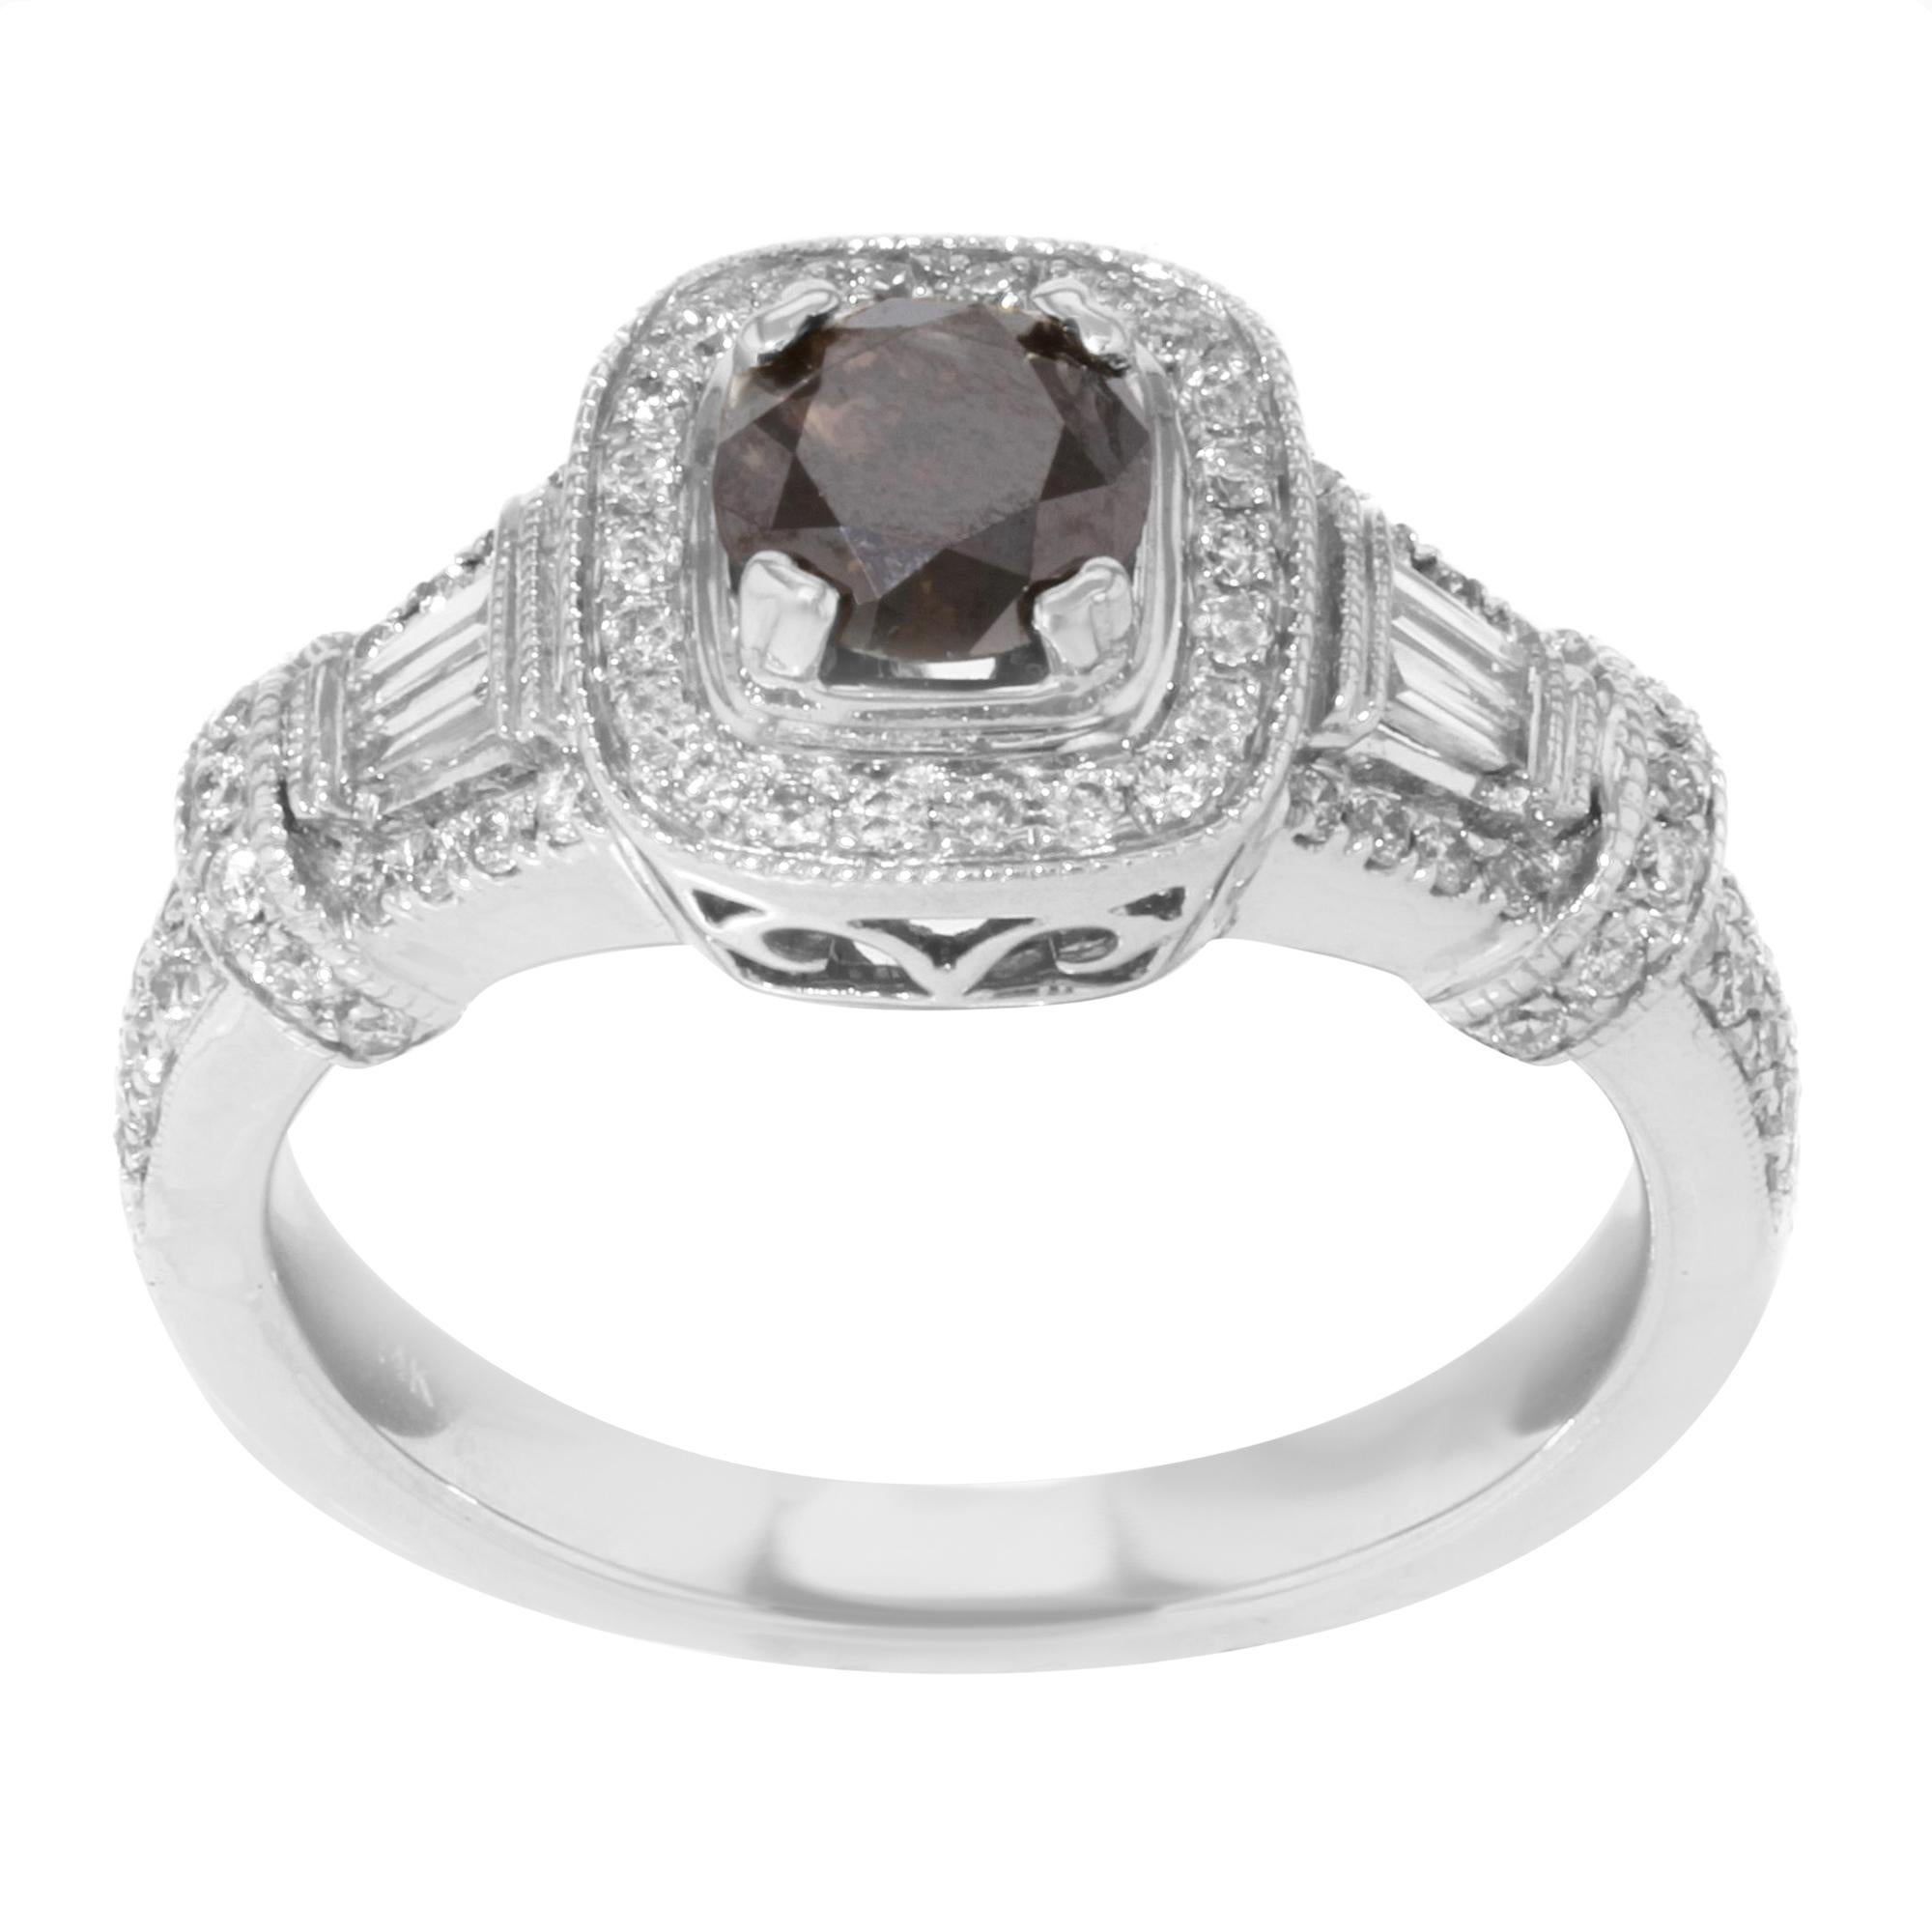 This stunning brown diamond engagement ring is crafted in 14k white gold. It features a round cut color treated brown diamond center stone weighing approx. 0.67 cttw with pave set round and baguette cut white diamond accent stones weighing approx.